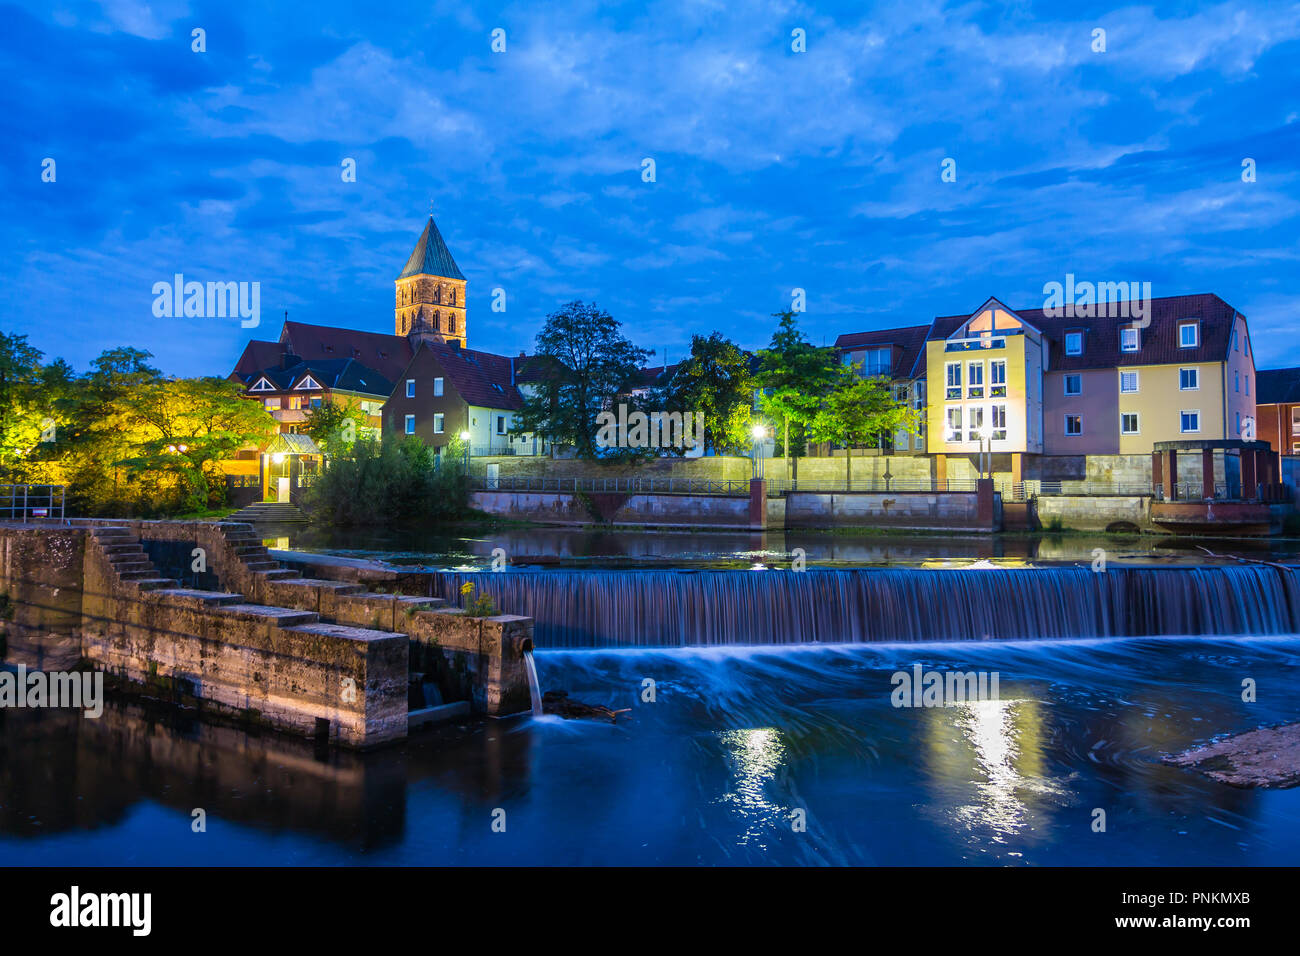 Rheine, Germany - September 5, 2018: night view of locks on Ems river, belfry tower of medieval Sankt Antonius Basilica in the backgroung Stock Photo